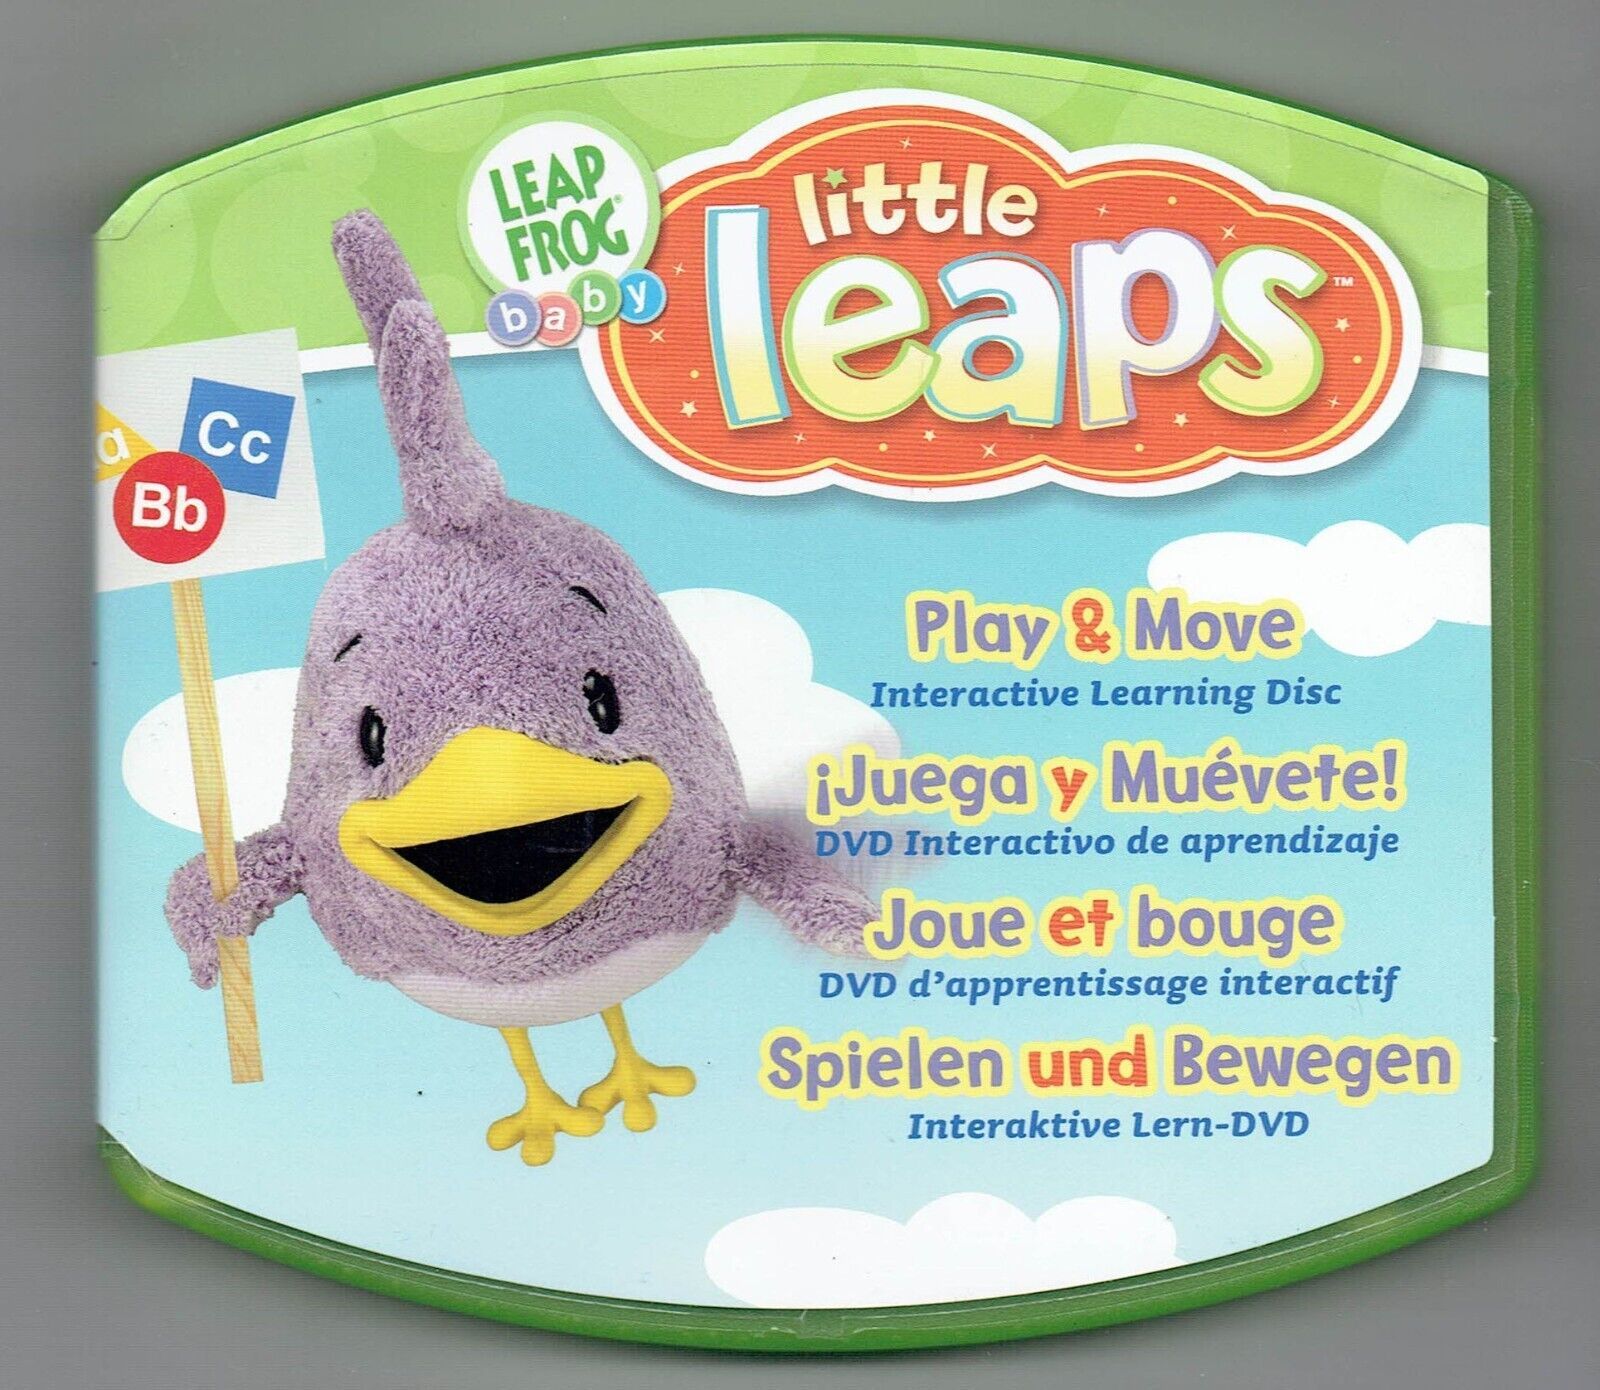 Leapfrog Baby little leaps Play and Move Disc Game Rare Educational - $14.43